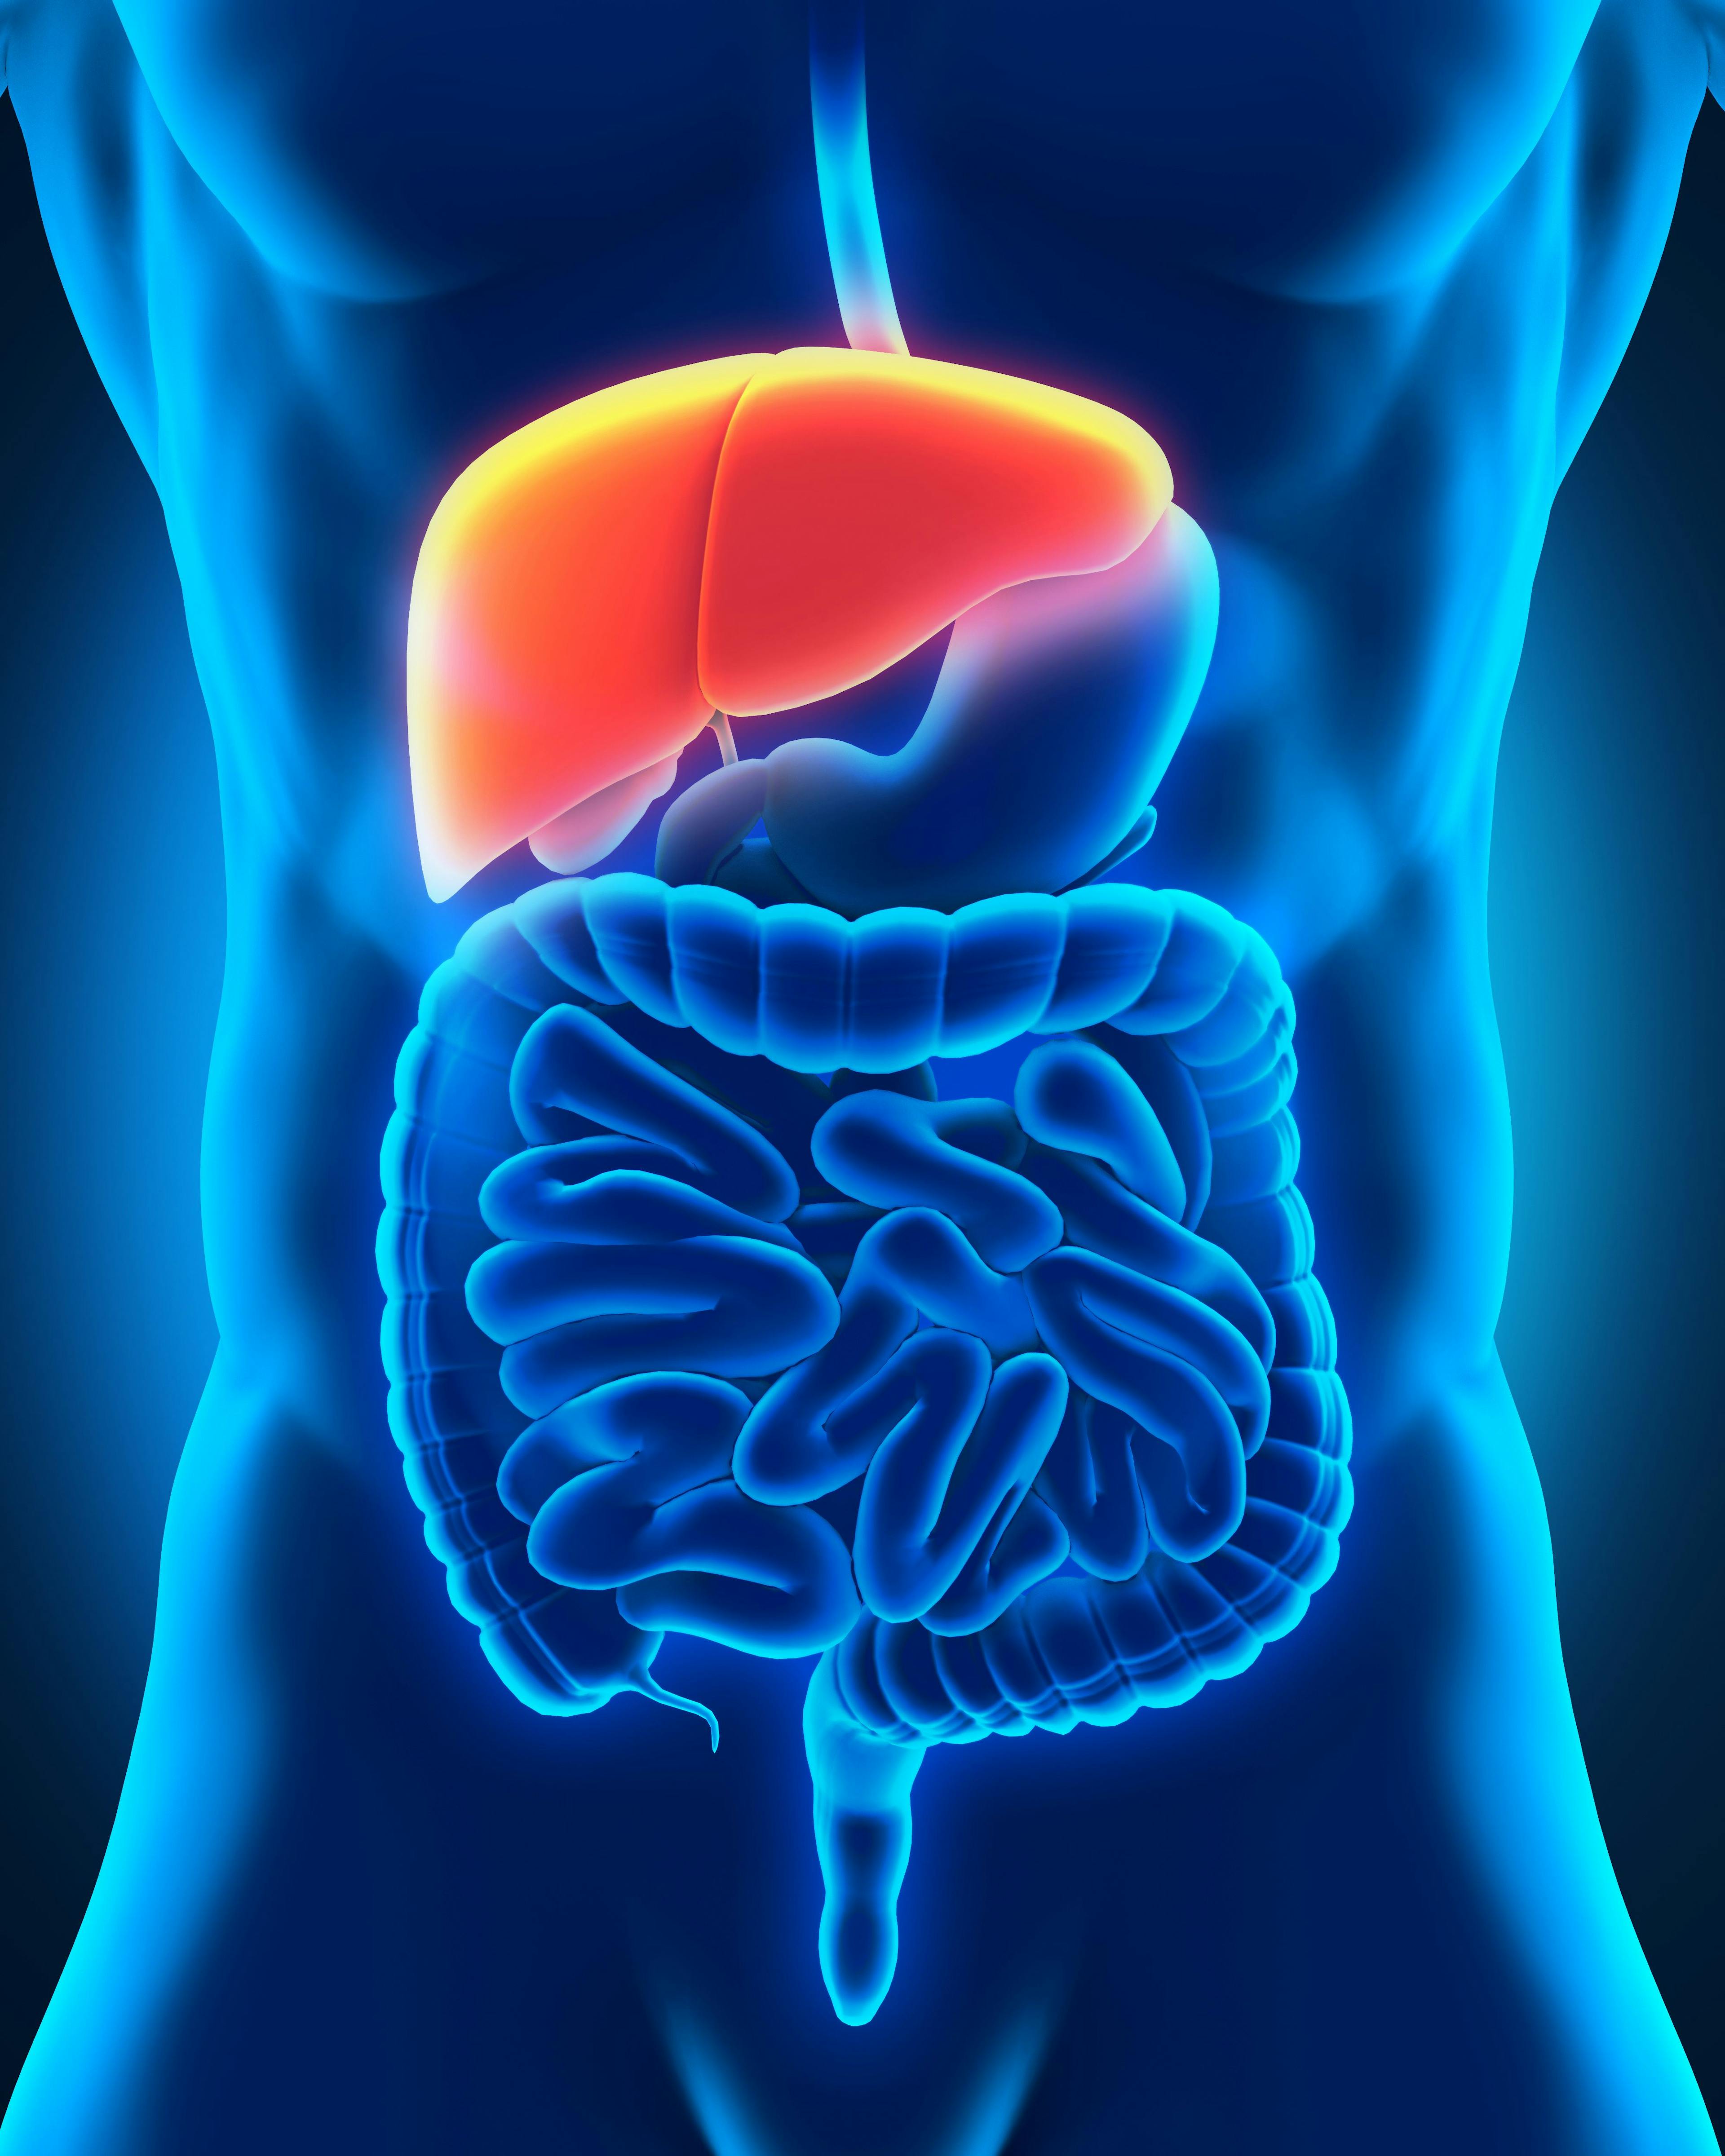 Findings from the phase 3 HIMALAYA trial indicate that durvalumab with or without tremelimumab remained efficacious regardless of the presence of anti-drug antibodies in unresectable hepatocellular carcinoma.